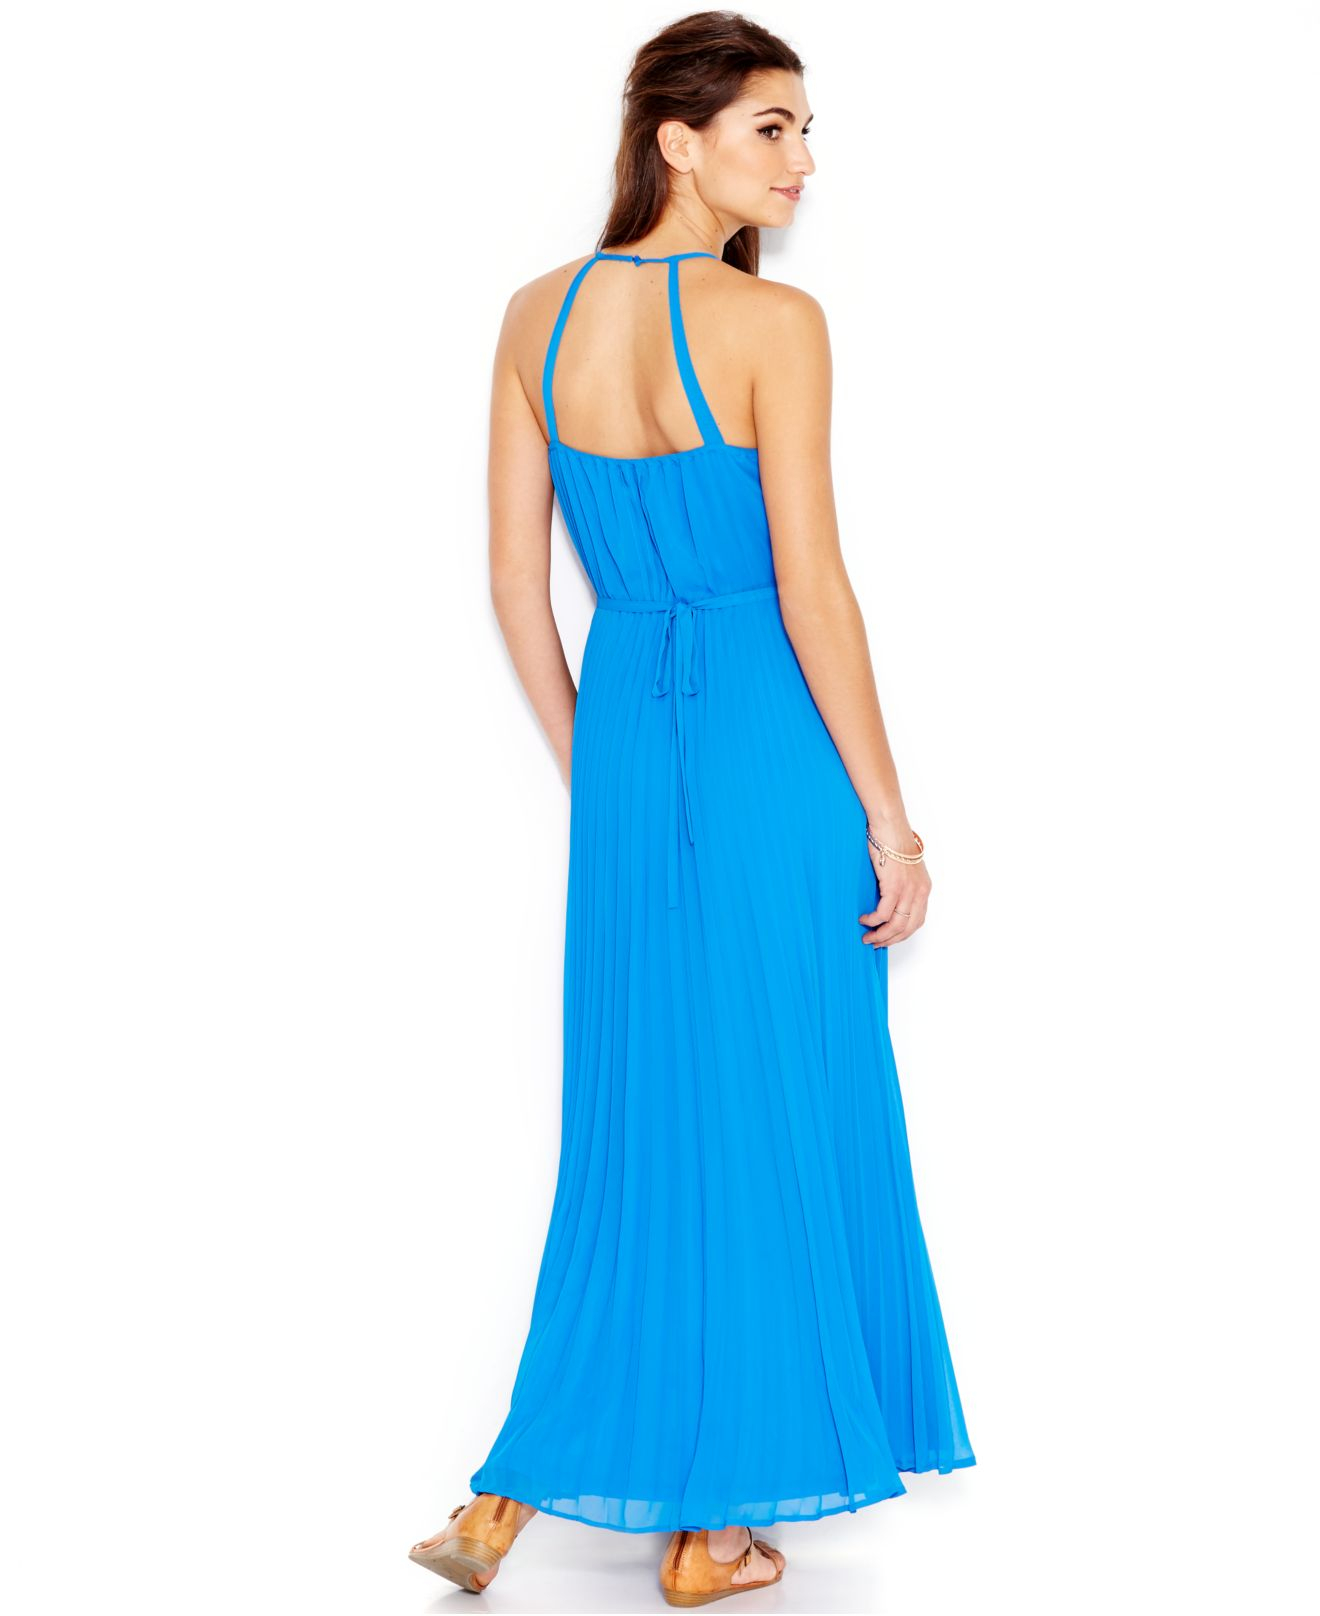 Jessica simpson Pleated Belted Maxi Dress in Blue  Lyst